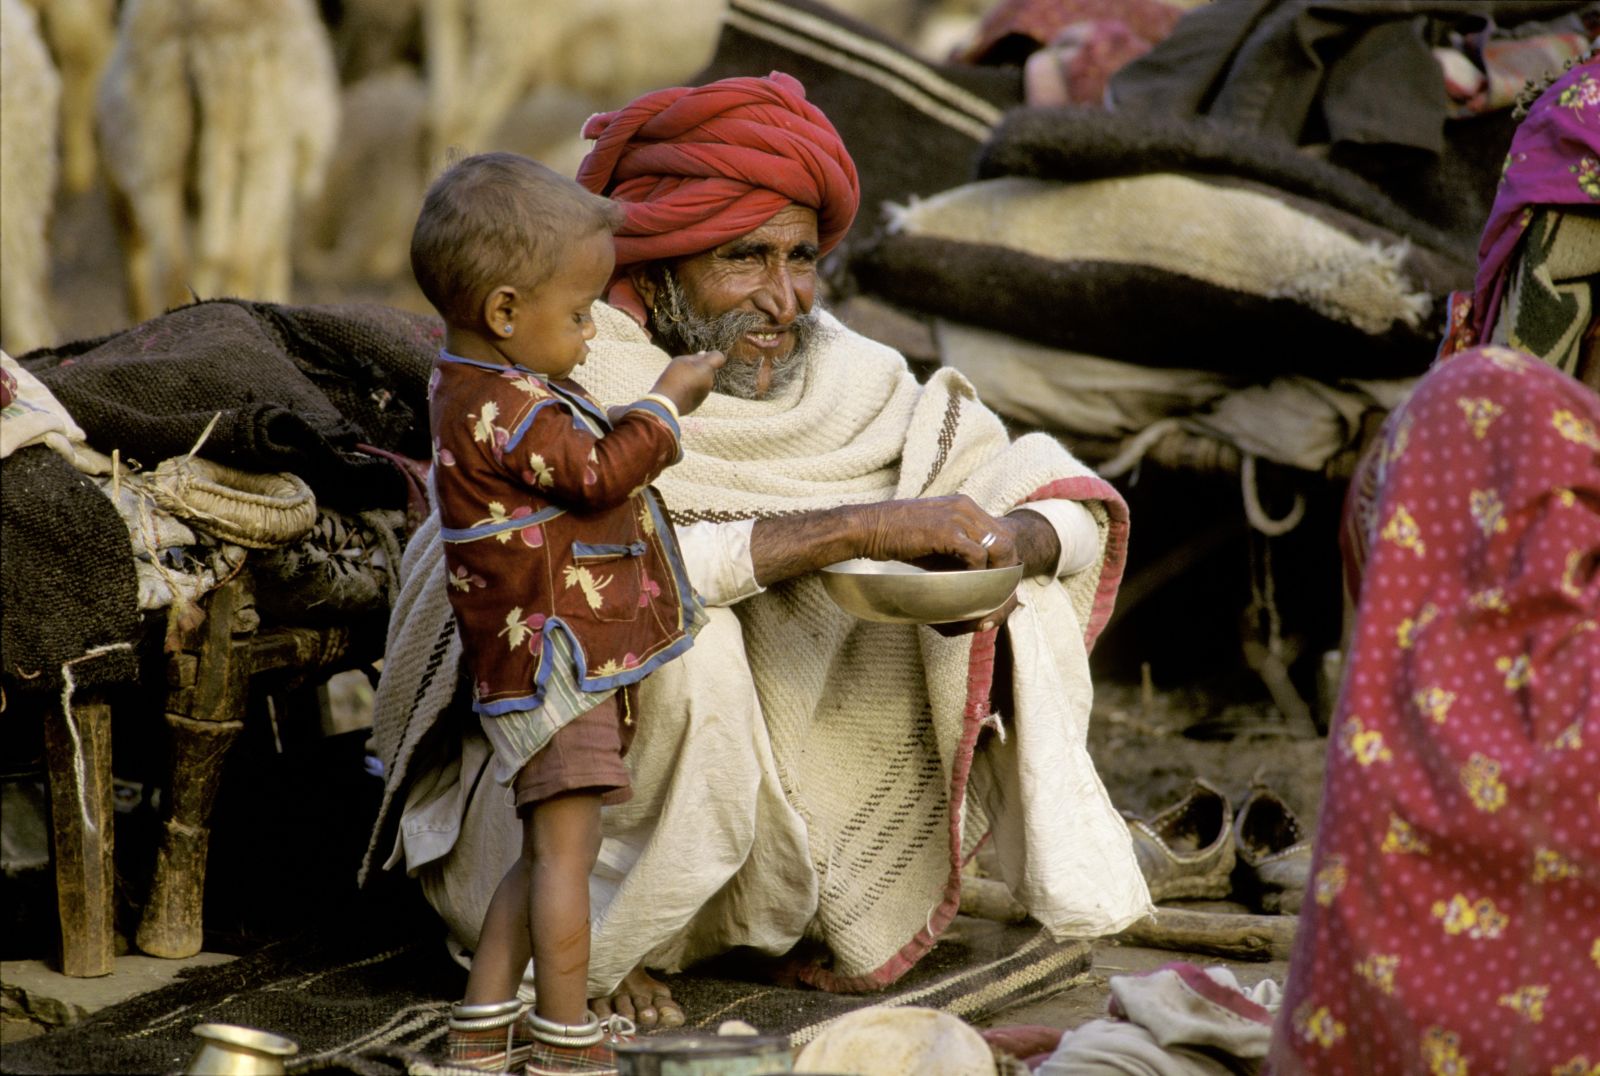 India currently has comparatively few very young and very old persons: an infant and an old man from a rural community in Rajasthan